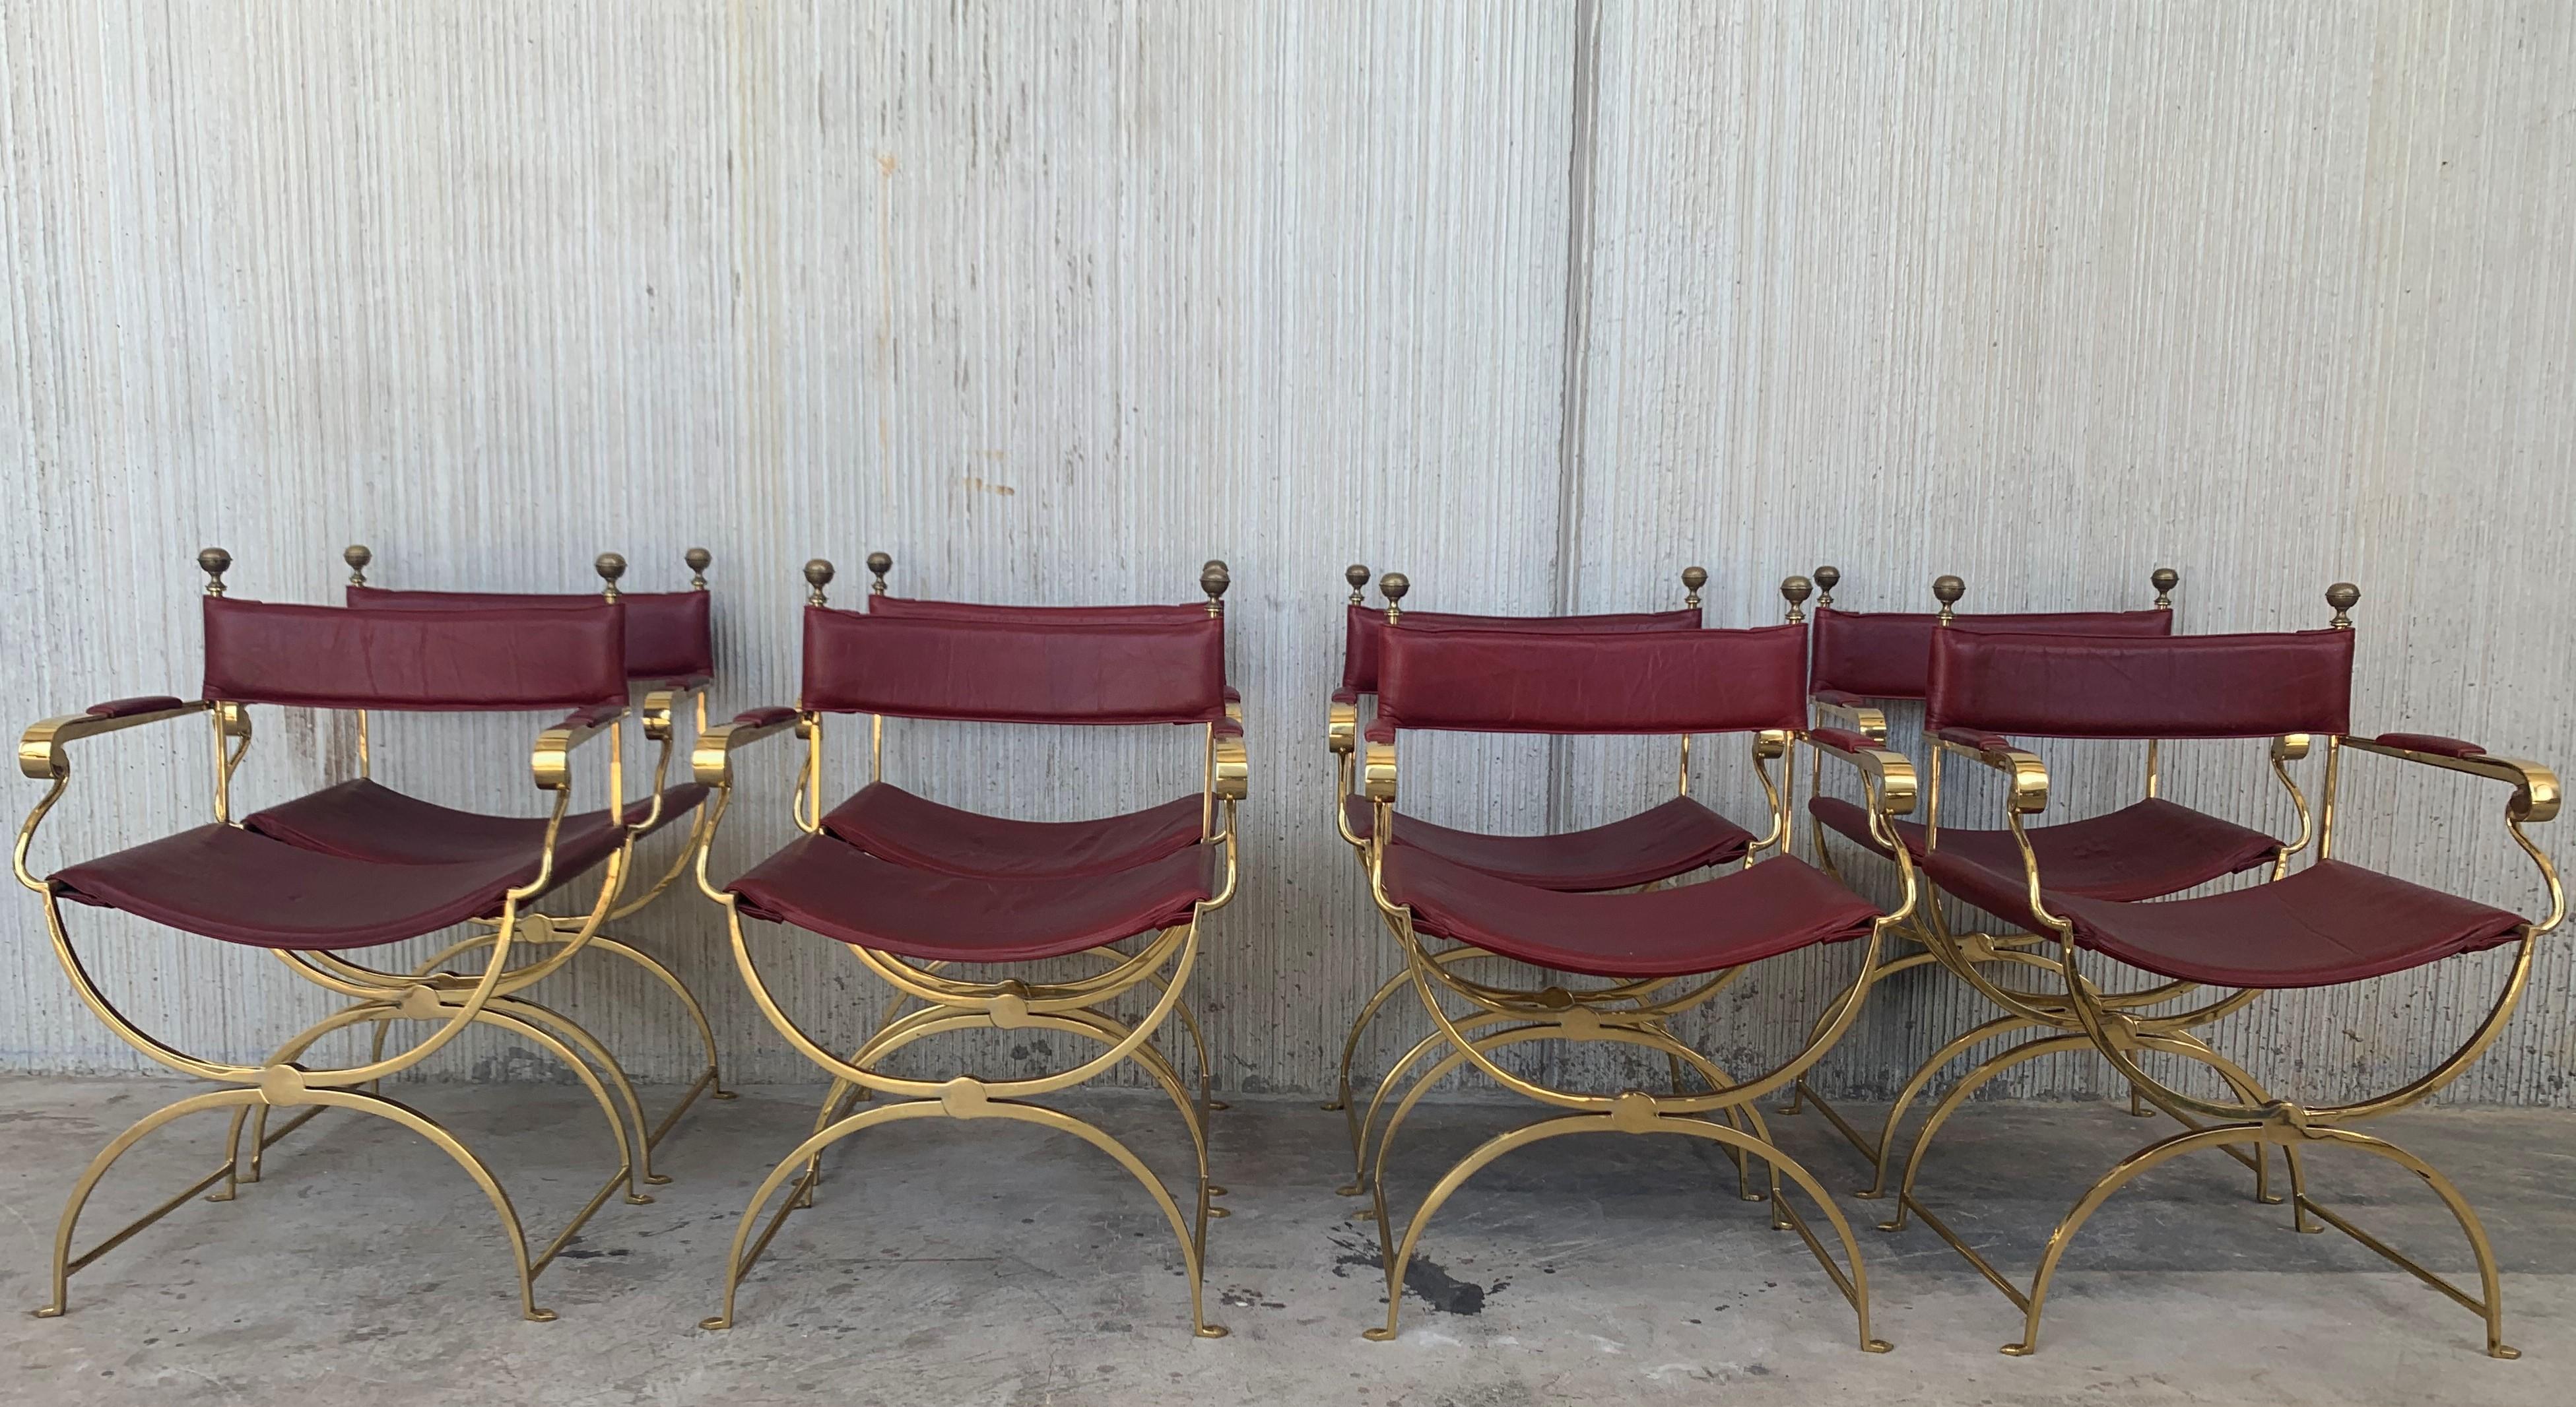 1960s Italian Hollywood Regency Chrome and Leather Savonarola Director's Chairs For Sale 2